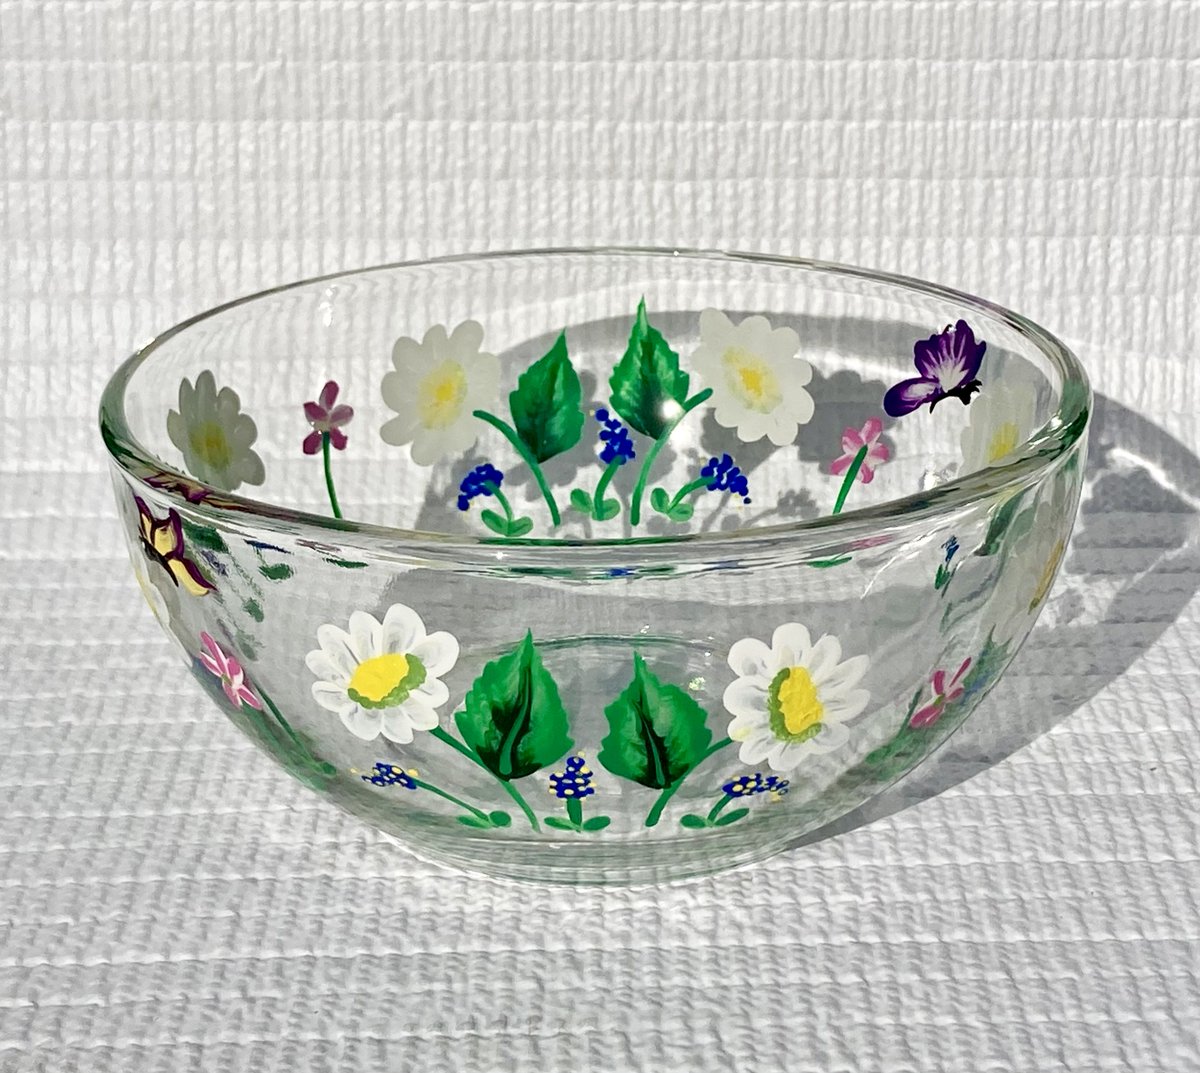 Daisies and butterflies etsy.com/listing/163305… #floralbowl #MothersDayGifts #candybowl #SMILEtt23 #etsyshop #CraftBizParty #etsy